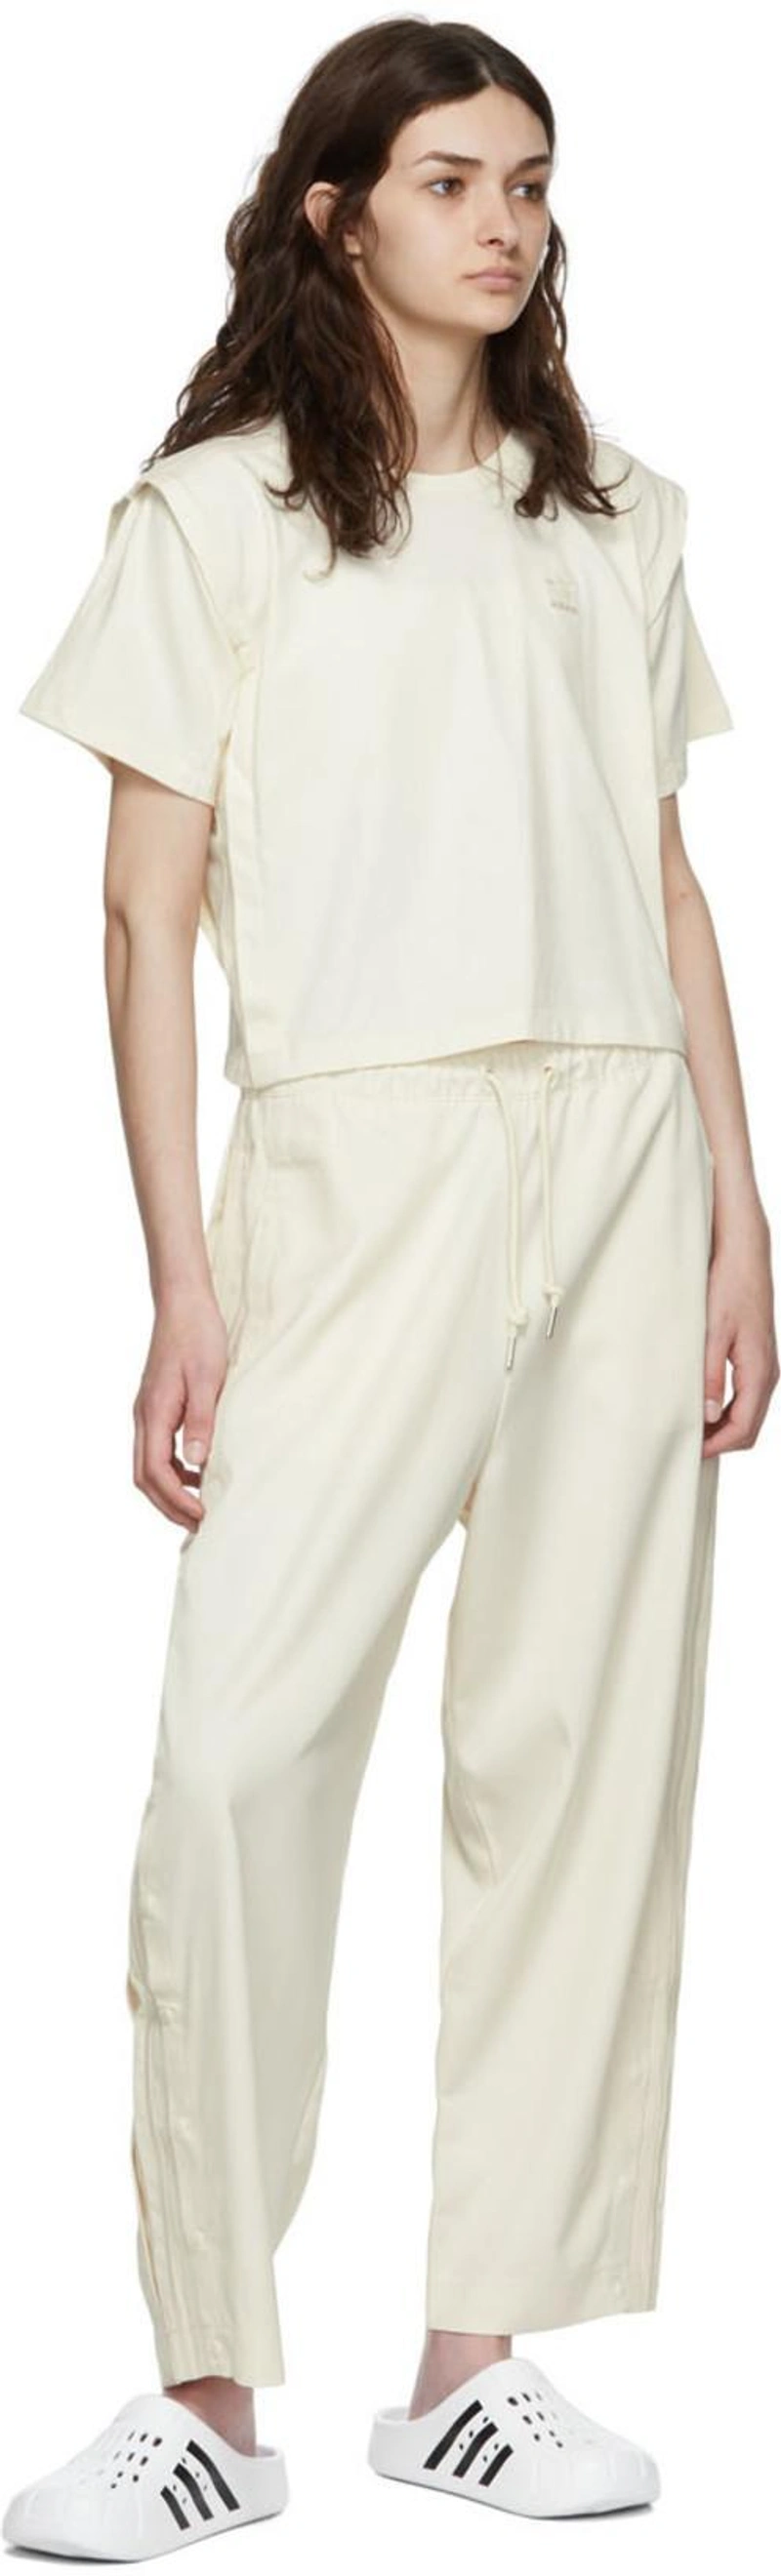 SSENSE's Post | 搭配: Adidas Originals Boxy 3-stripes Organic Cotton T-shirt In Non-dyed；Adidas Originals Off-white Recycled Polyester Lounge Pants In Wonder White；Adidas Originals White Adilette Clog Sandals In Ftwwht/cbl